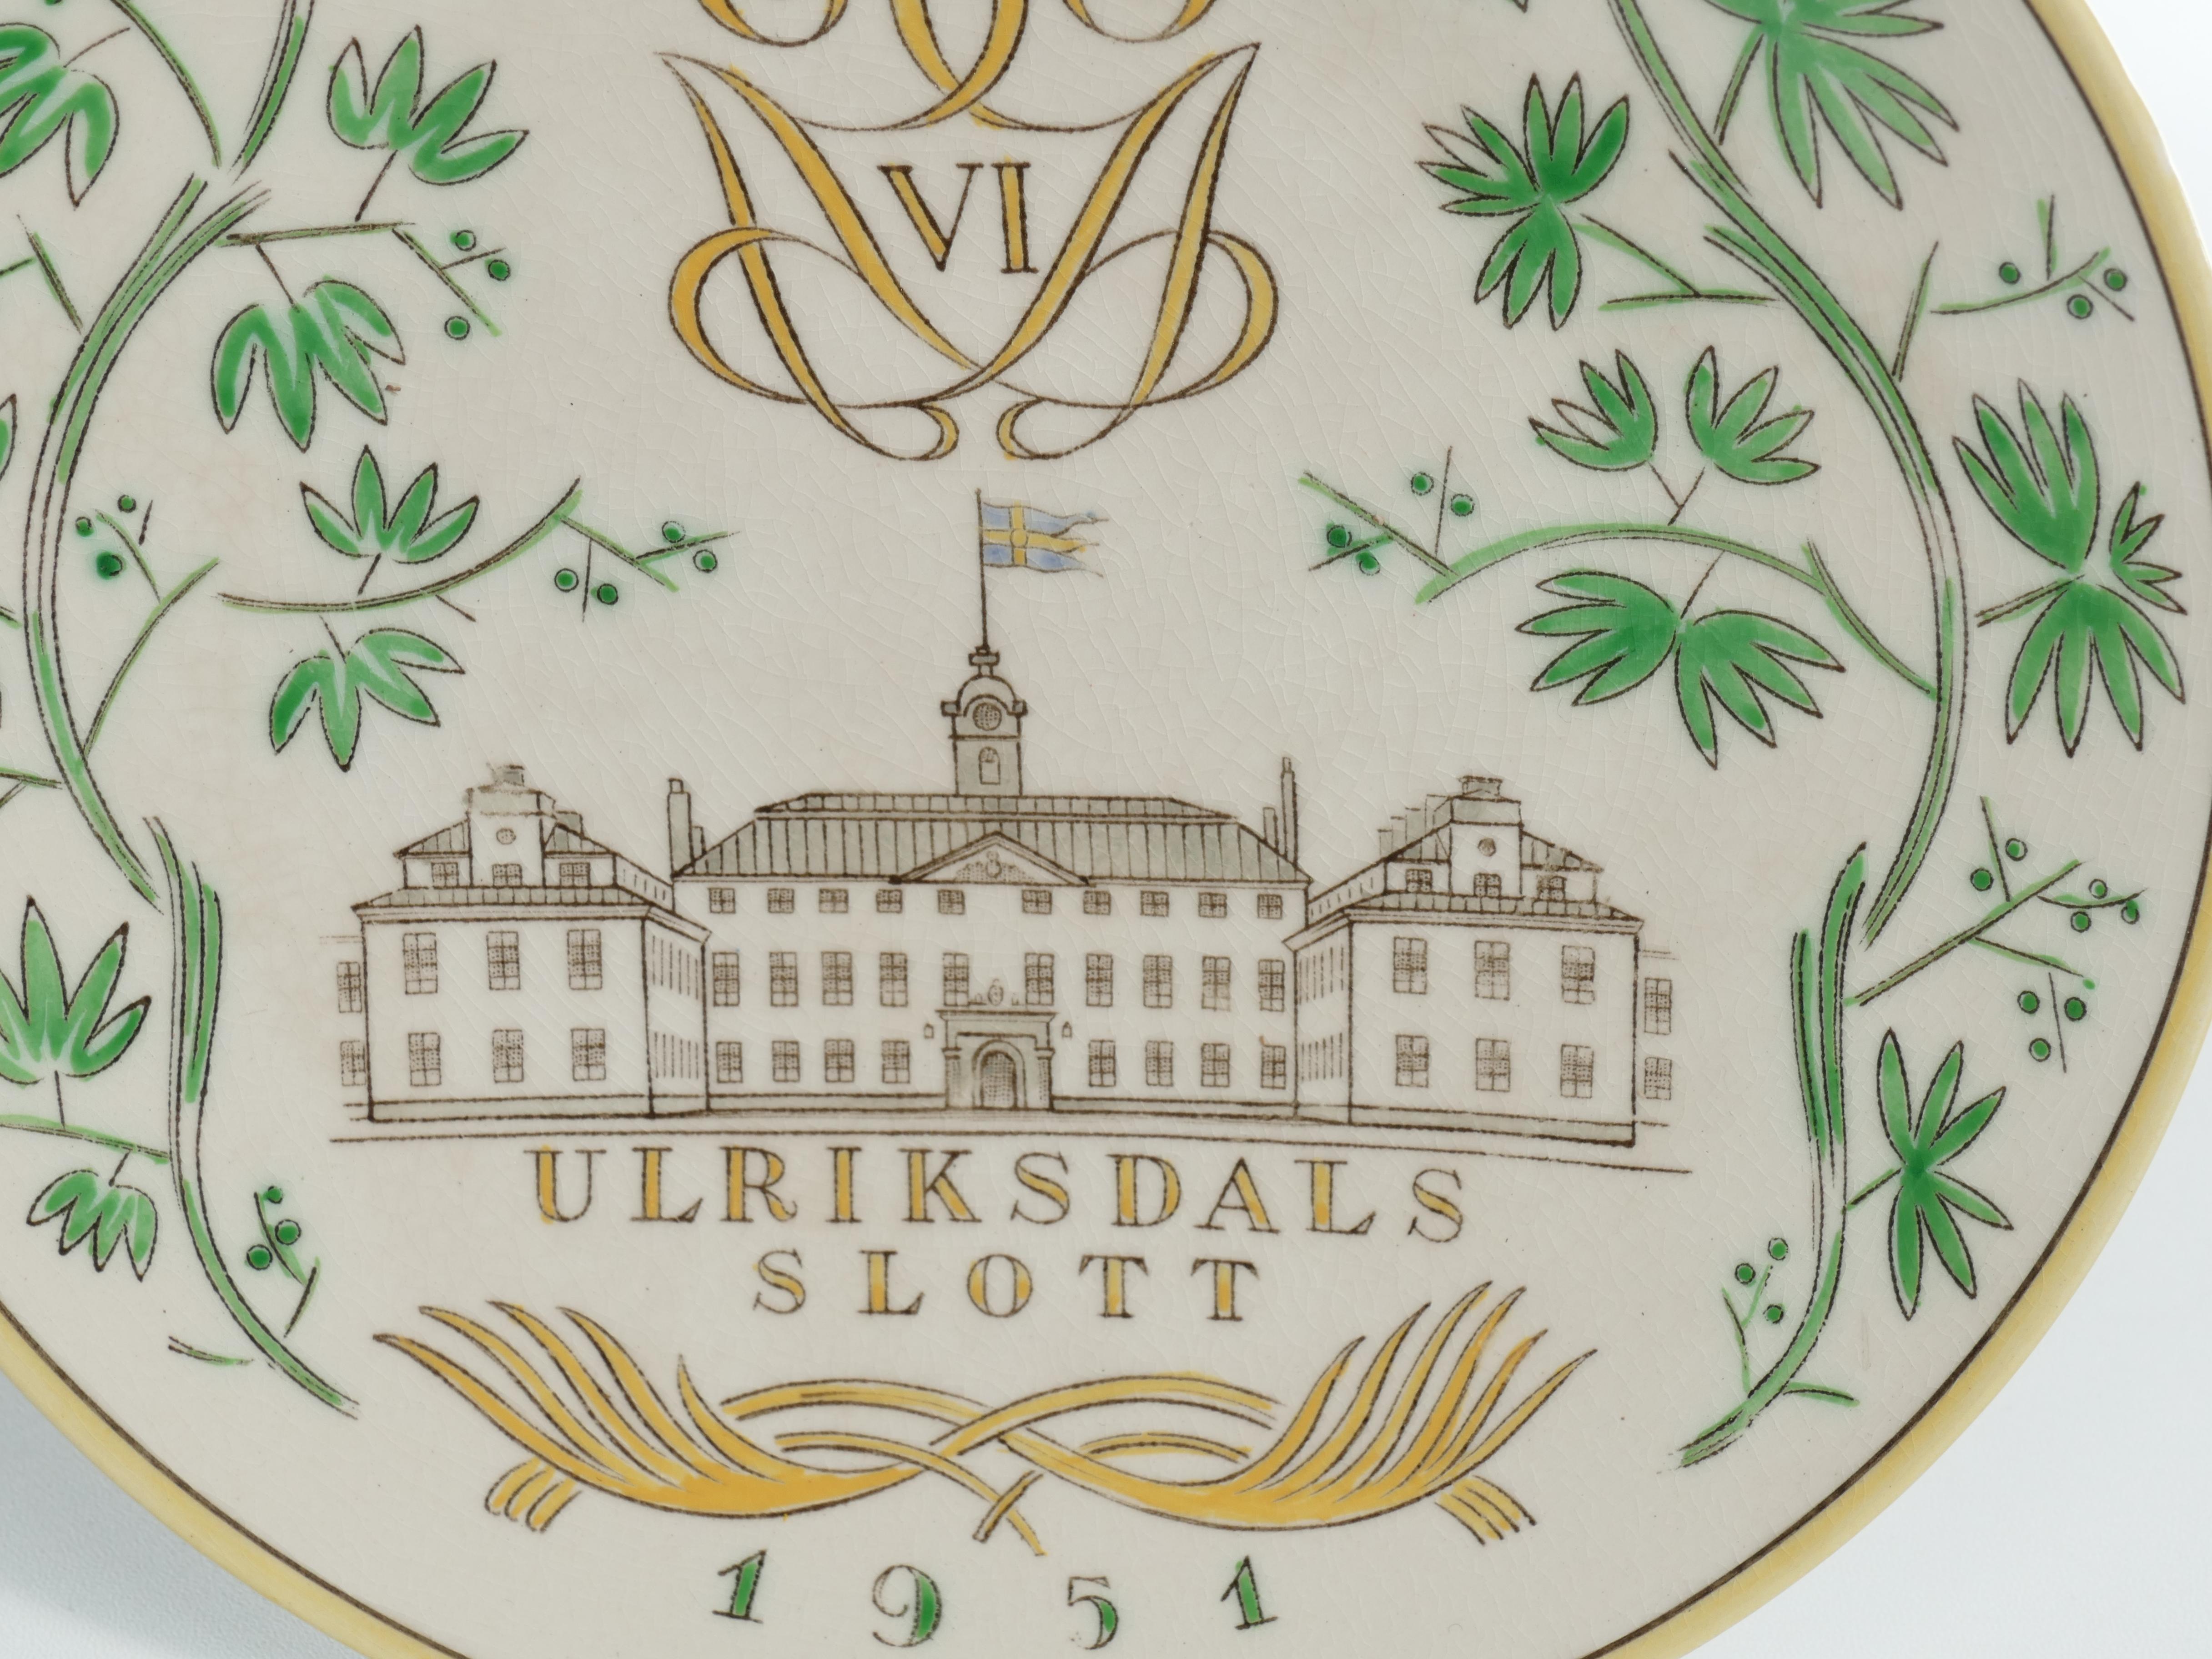 Mid-20th Century Swedish Grace Plates with Ulriksdal Palace in Yellow and Green by Gefle 1951 For Sale